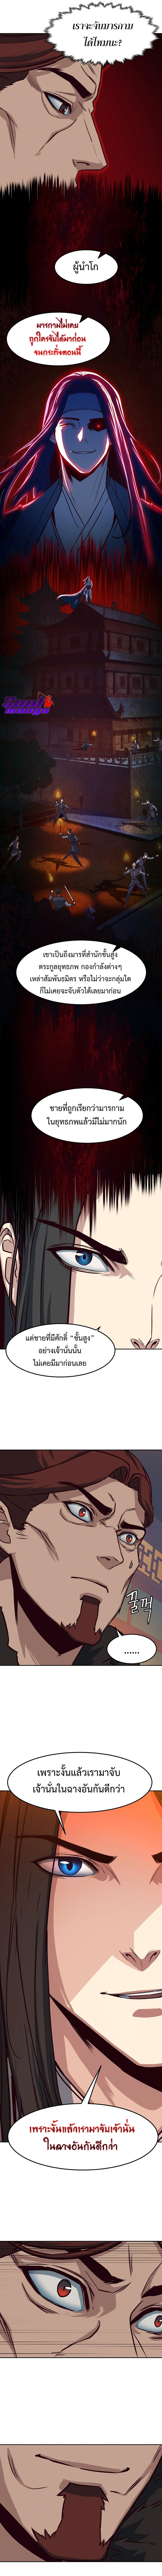 In the Night Consumed by Blades, I Walk เธเธญเธเธ—เธตเน25 (9)